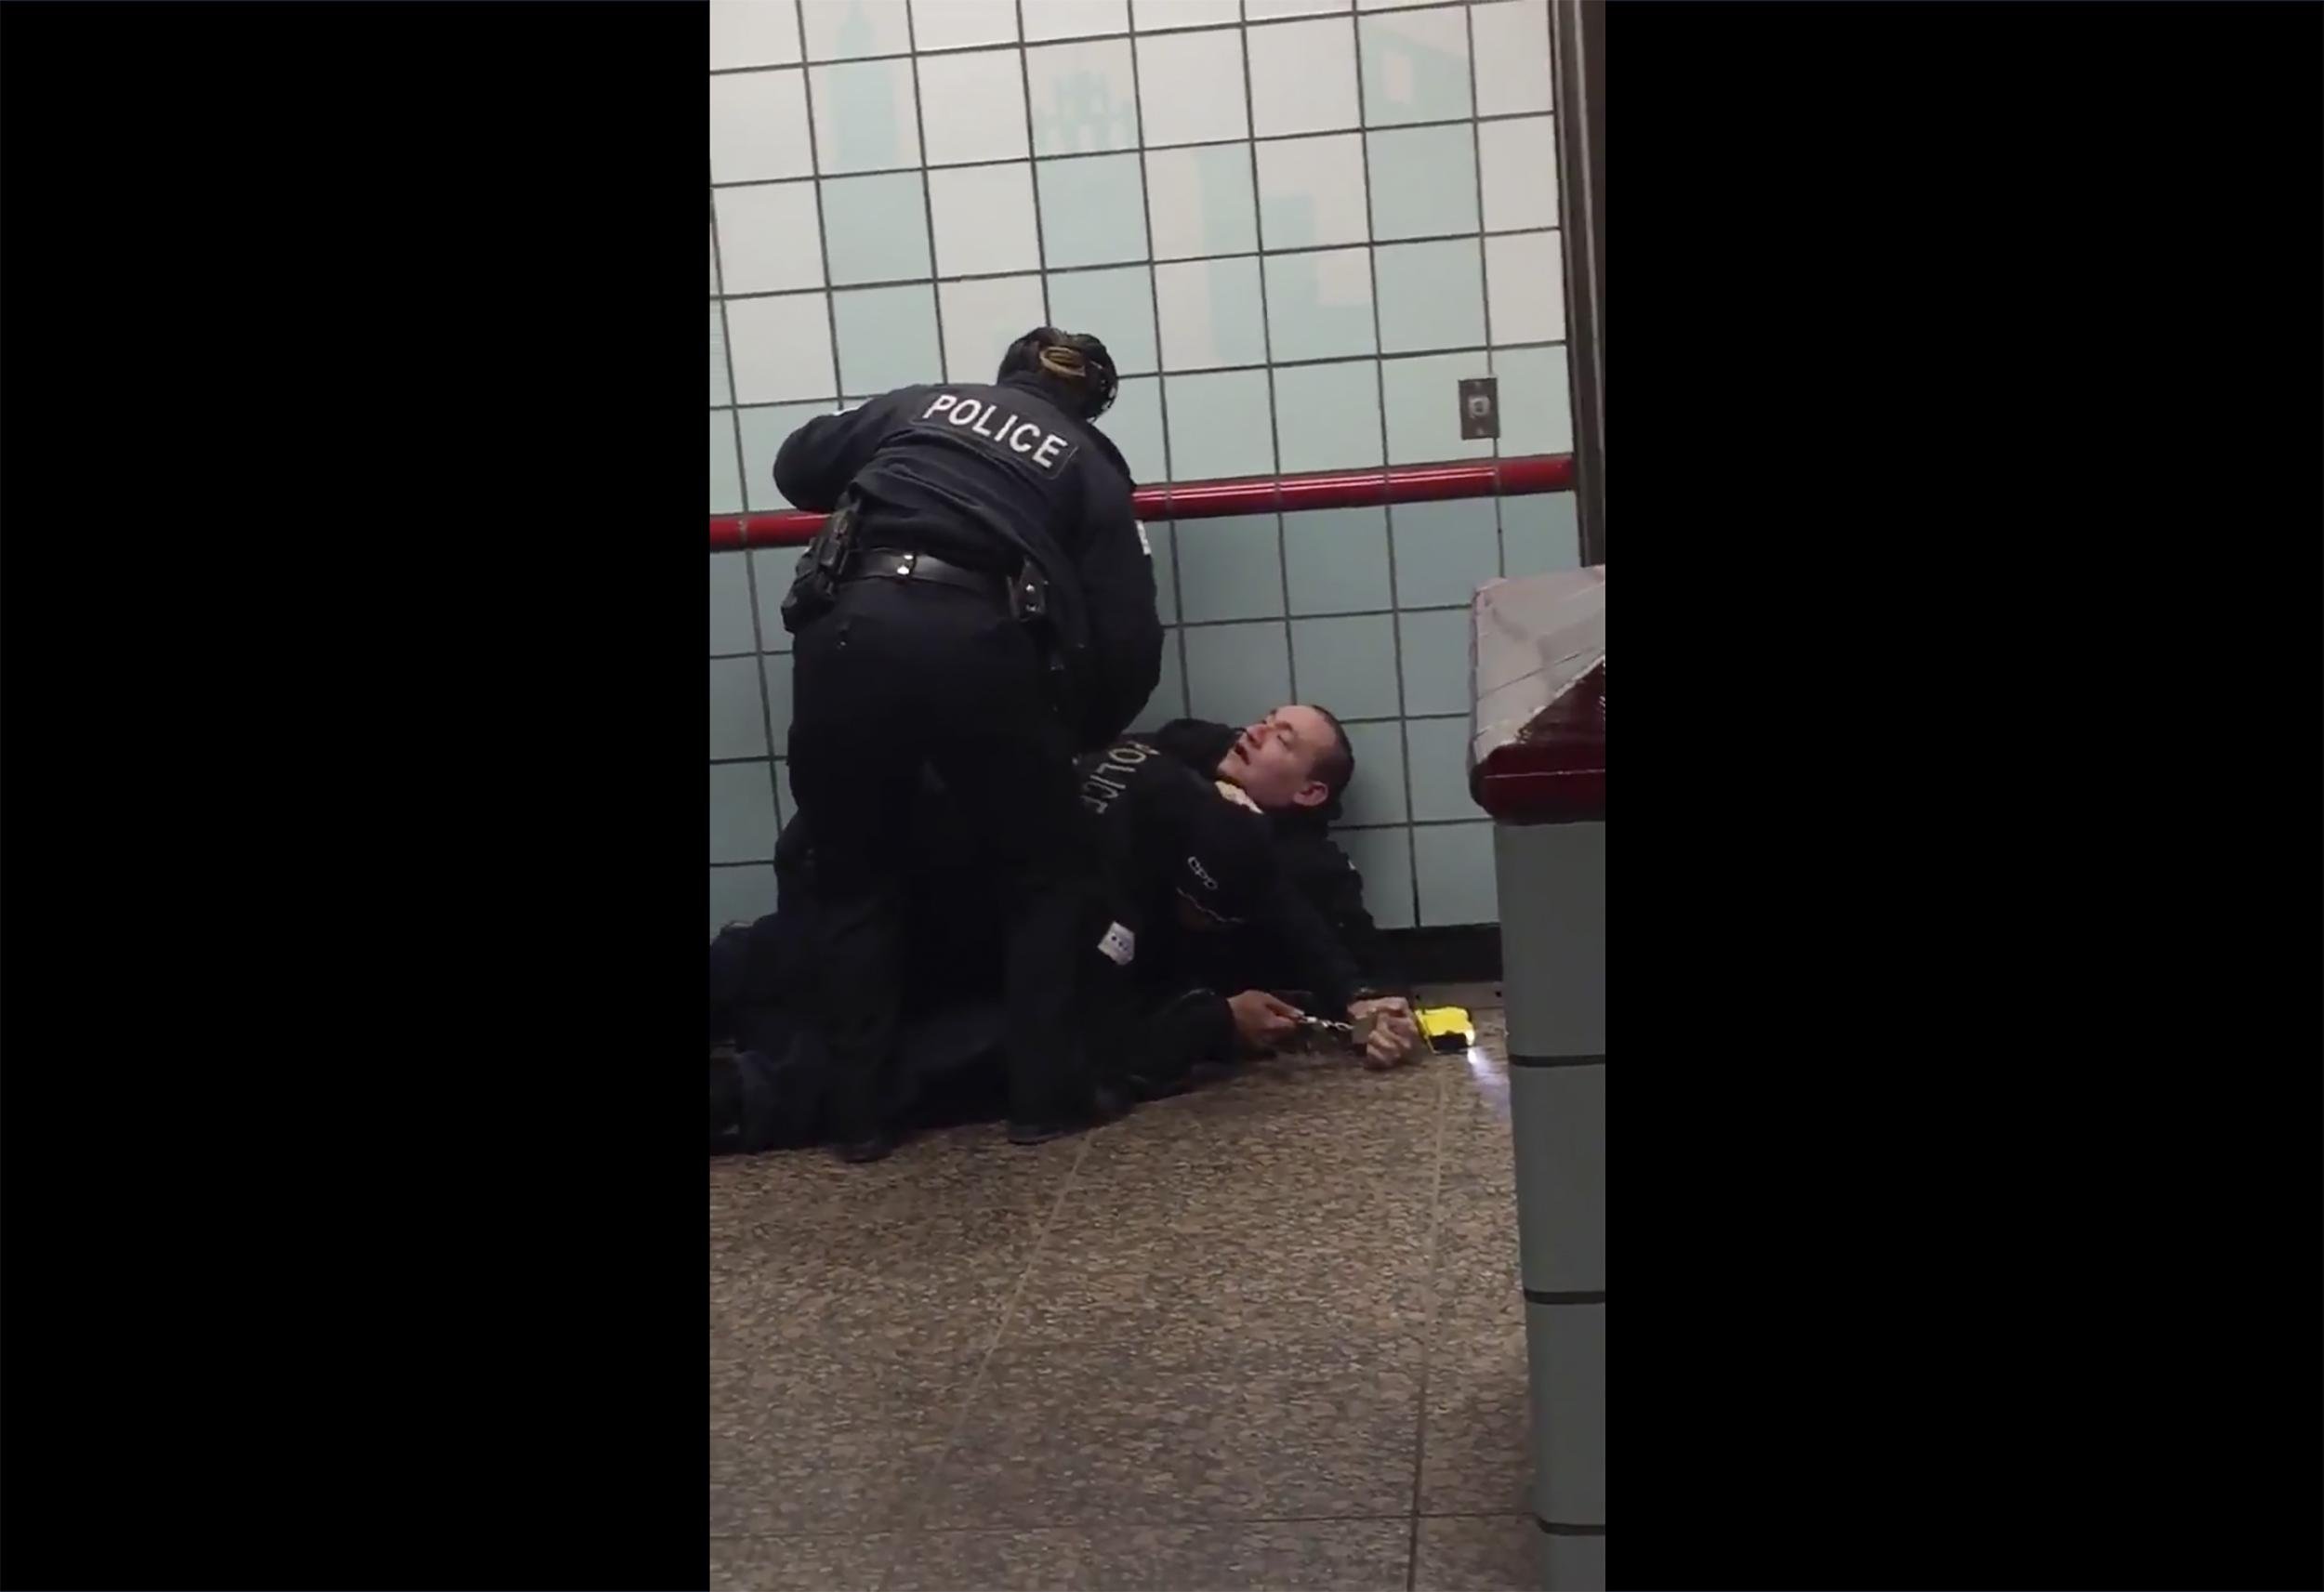 This Friday, Feb. 28, 2020 image from cellphone video shows Chicago police officers trying to apprehend a suspect inside a downtown Chicago train station. After a struggle with police, the suspect was shot as he fled up the escalator with the officers in pursuit. (Michael McDunnah via AP)